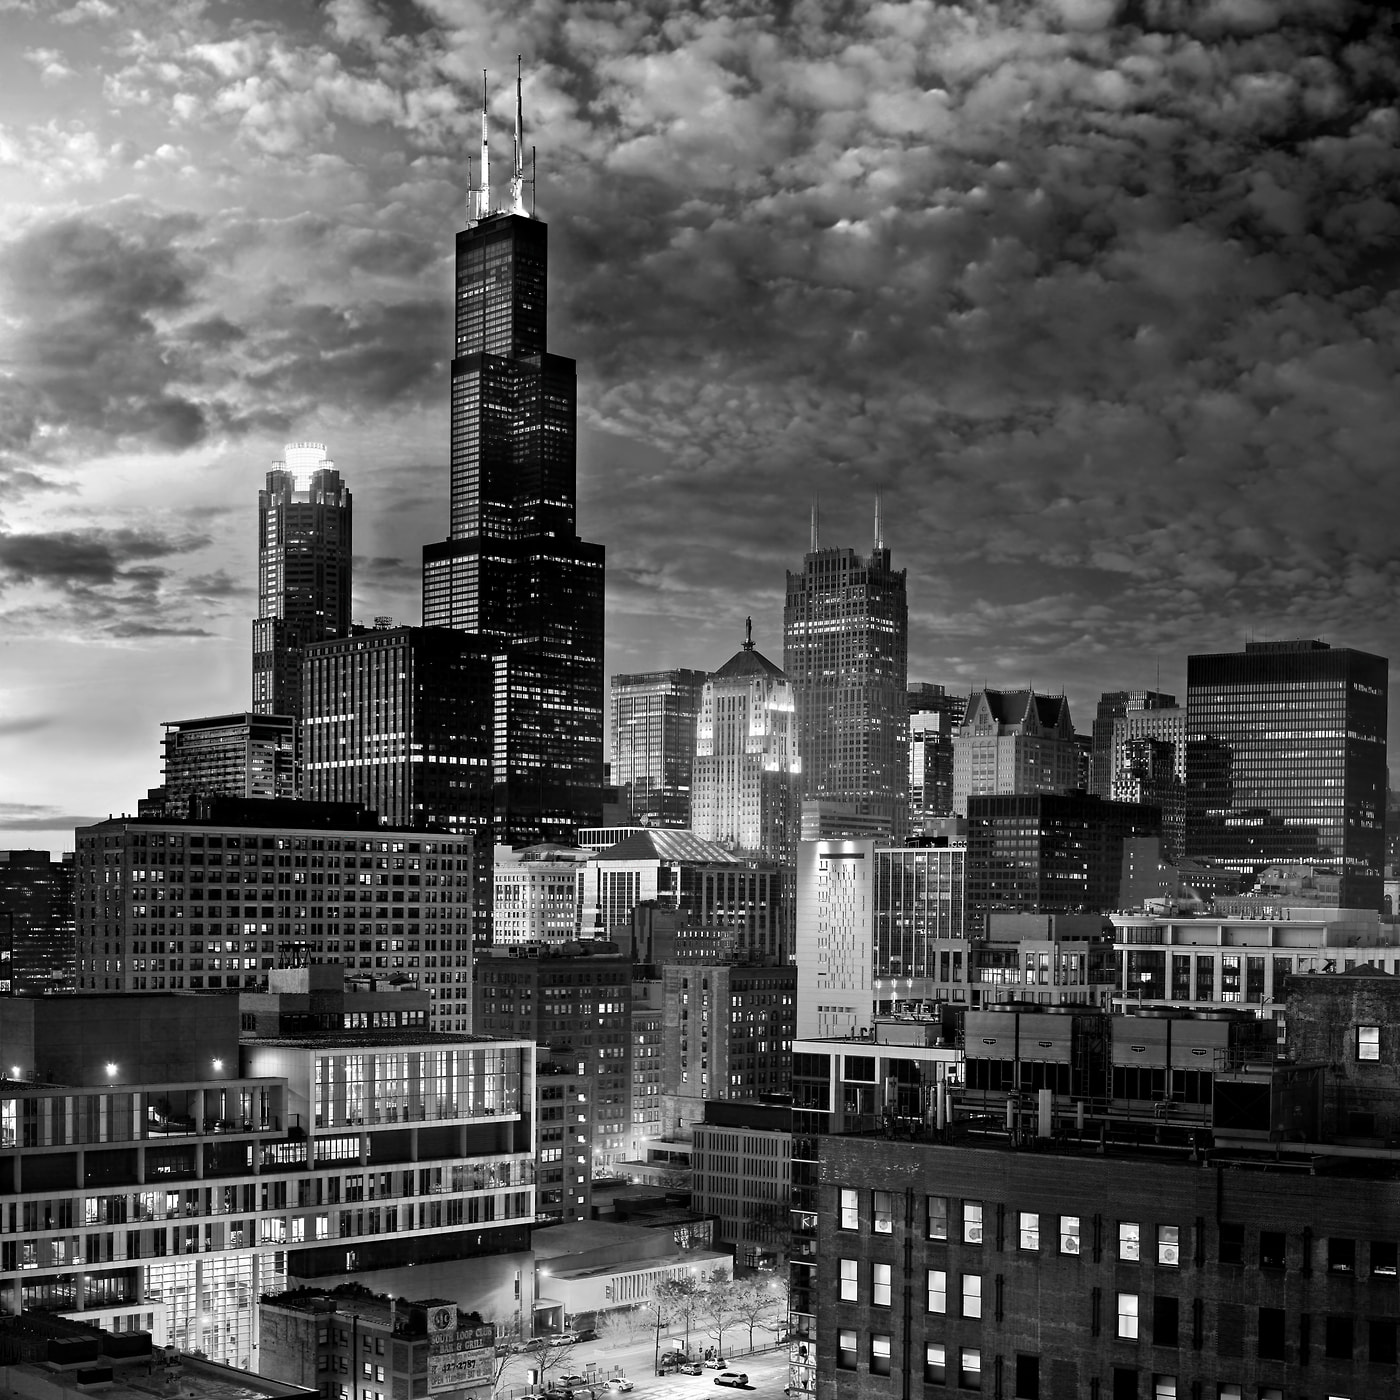 875 megapixels! A very high resolution, black & white VAST photo print of the Chicago skyline with the Willis Tower; cityscape photograph created by Phil Crawshay in Chicago, Illinois